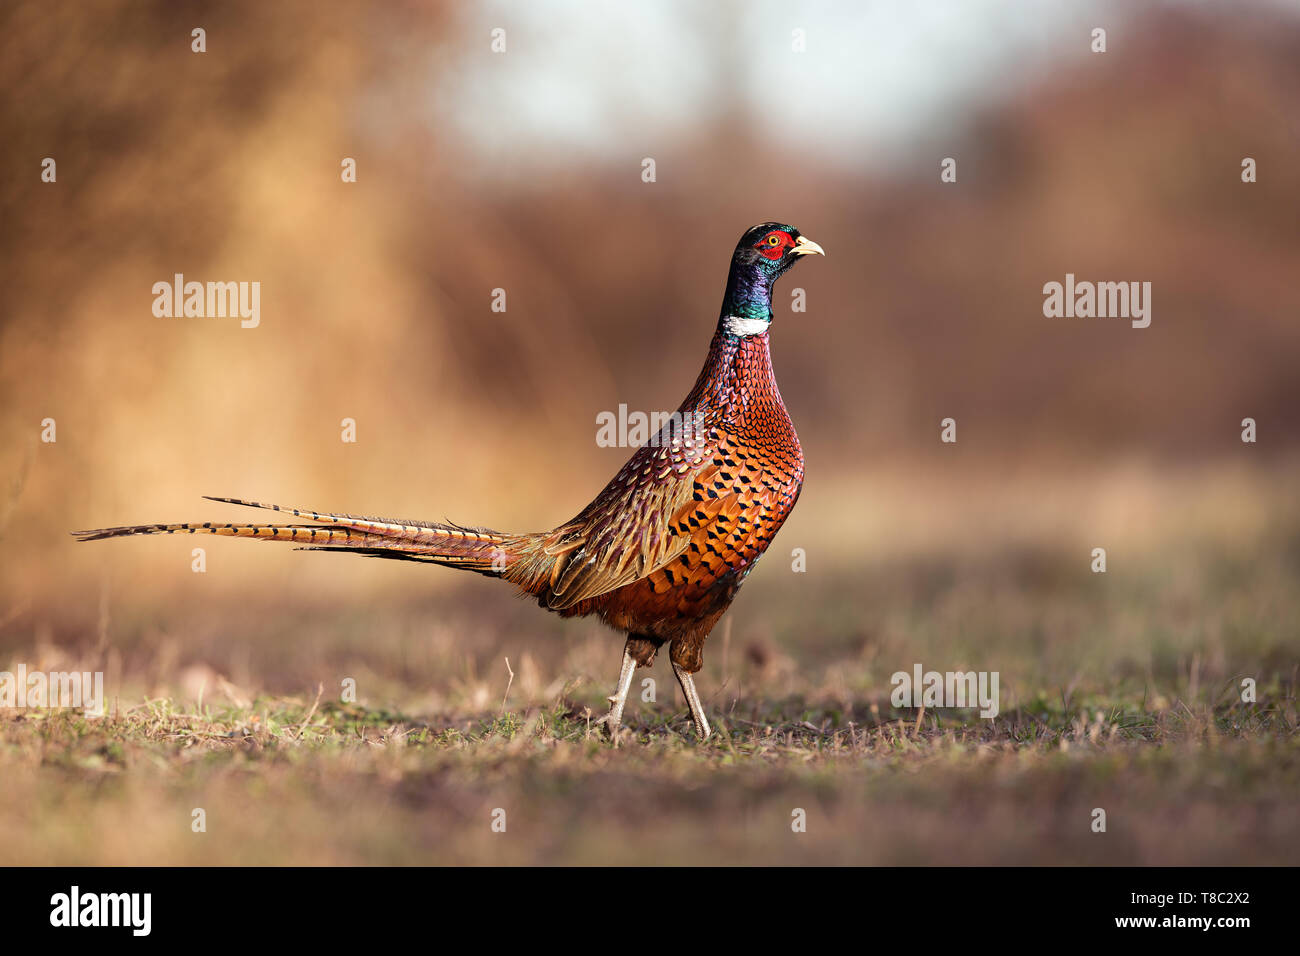 Male common pheasant, Phasianus colchicus, in spring evening light walking in meadow with blurred background in golden hour and vivid contrast bright  Stock Photo